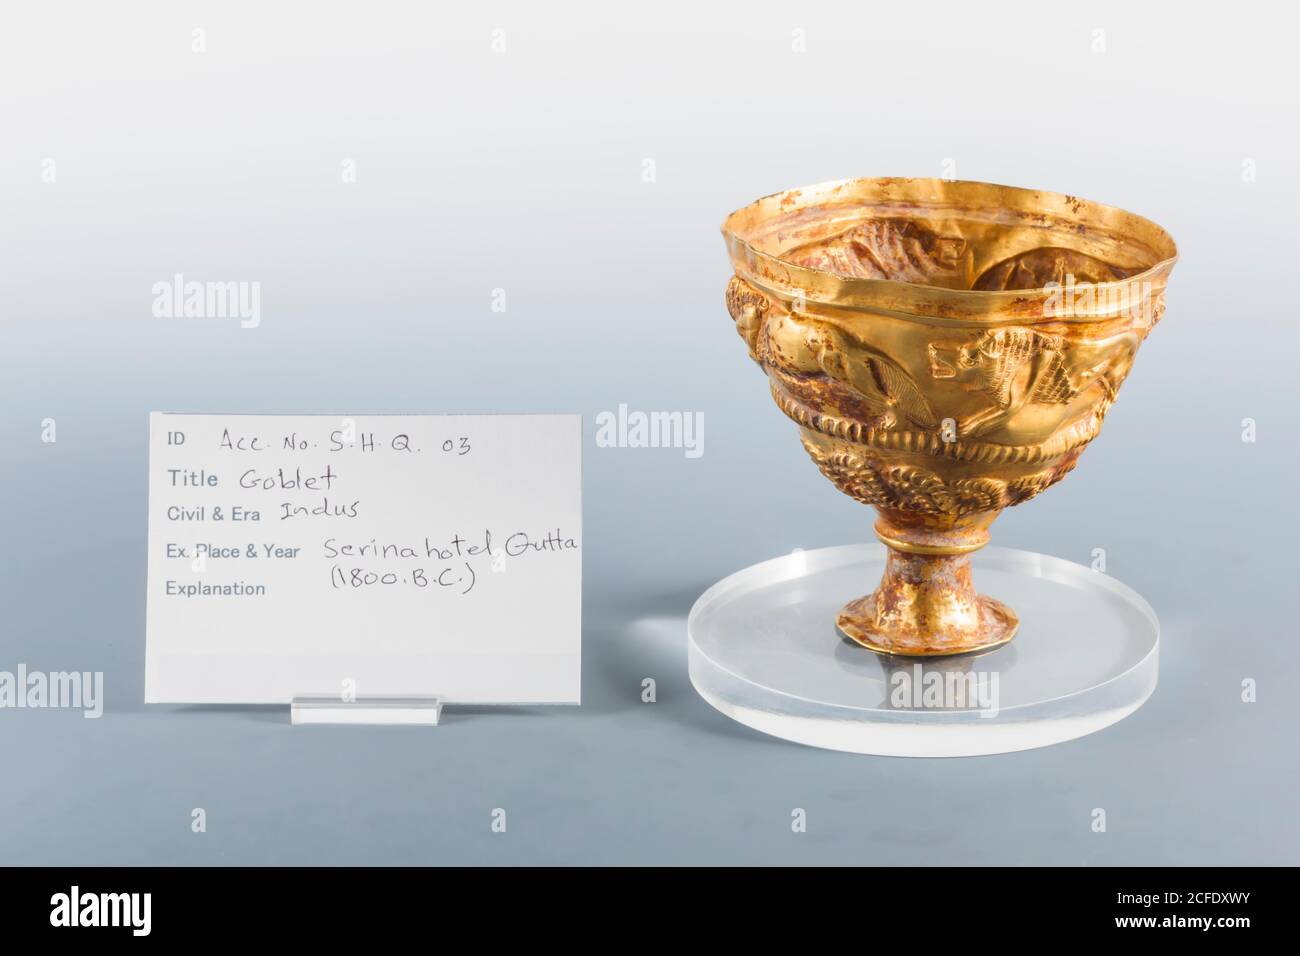 Gold goblet with lion relief, from Quetta, Indus valley civilization(valuables vault), National Museum of Pakistan,Karachi, Pakistan, South Asia, Asia Stock Photo